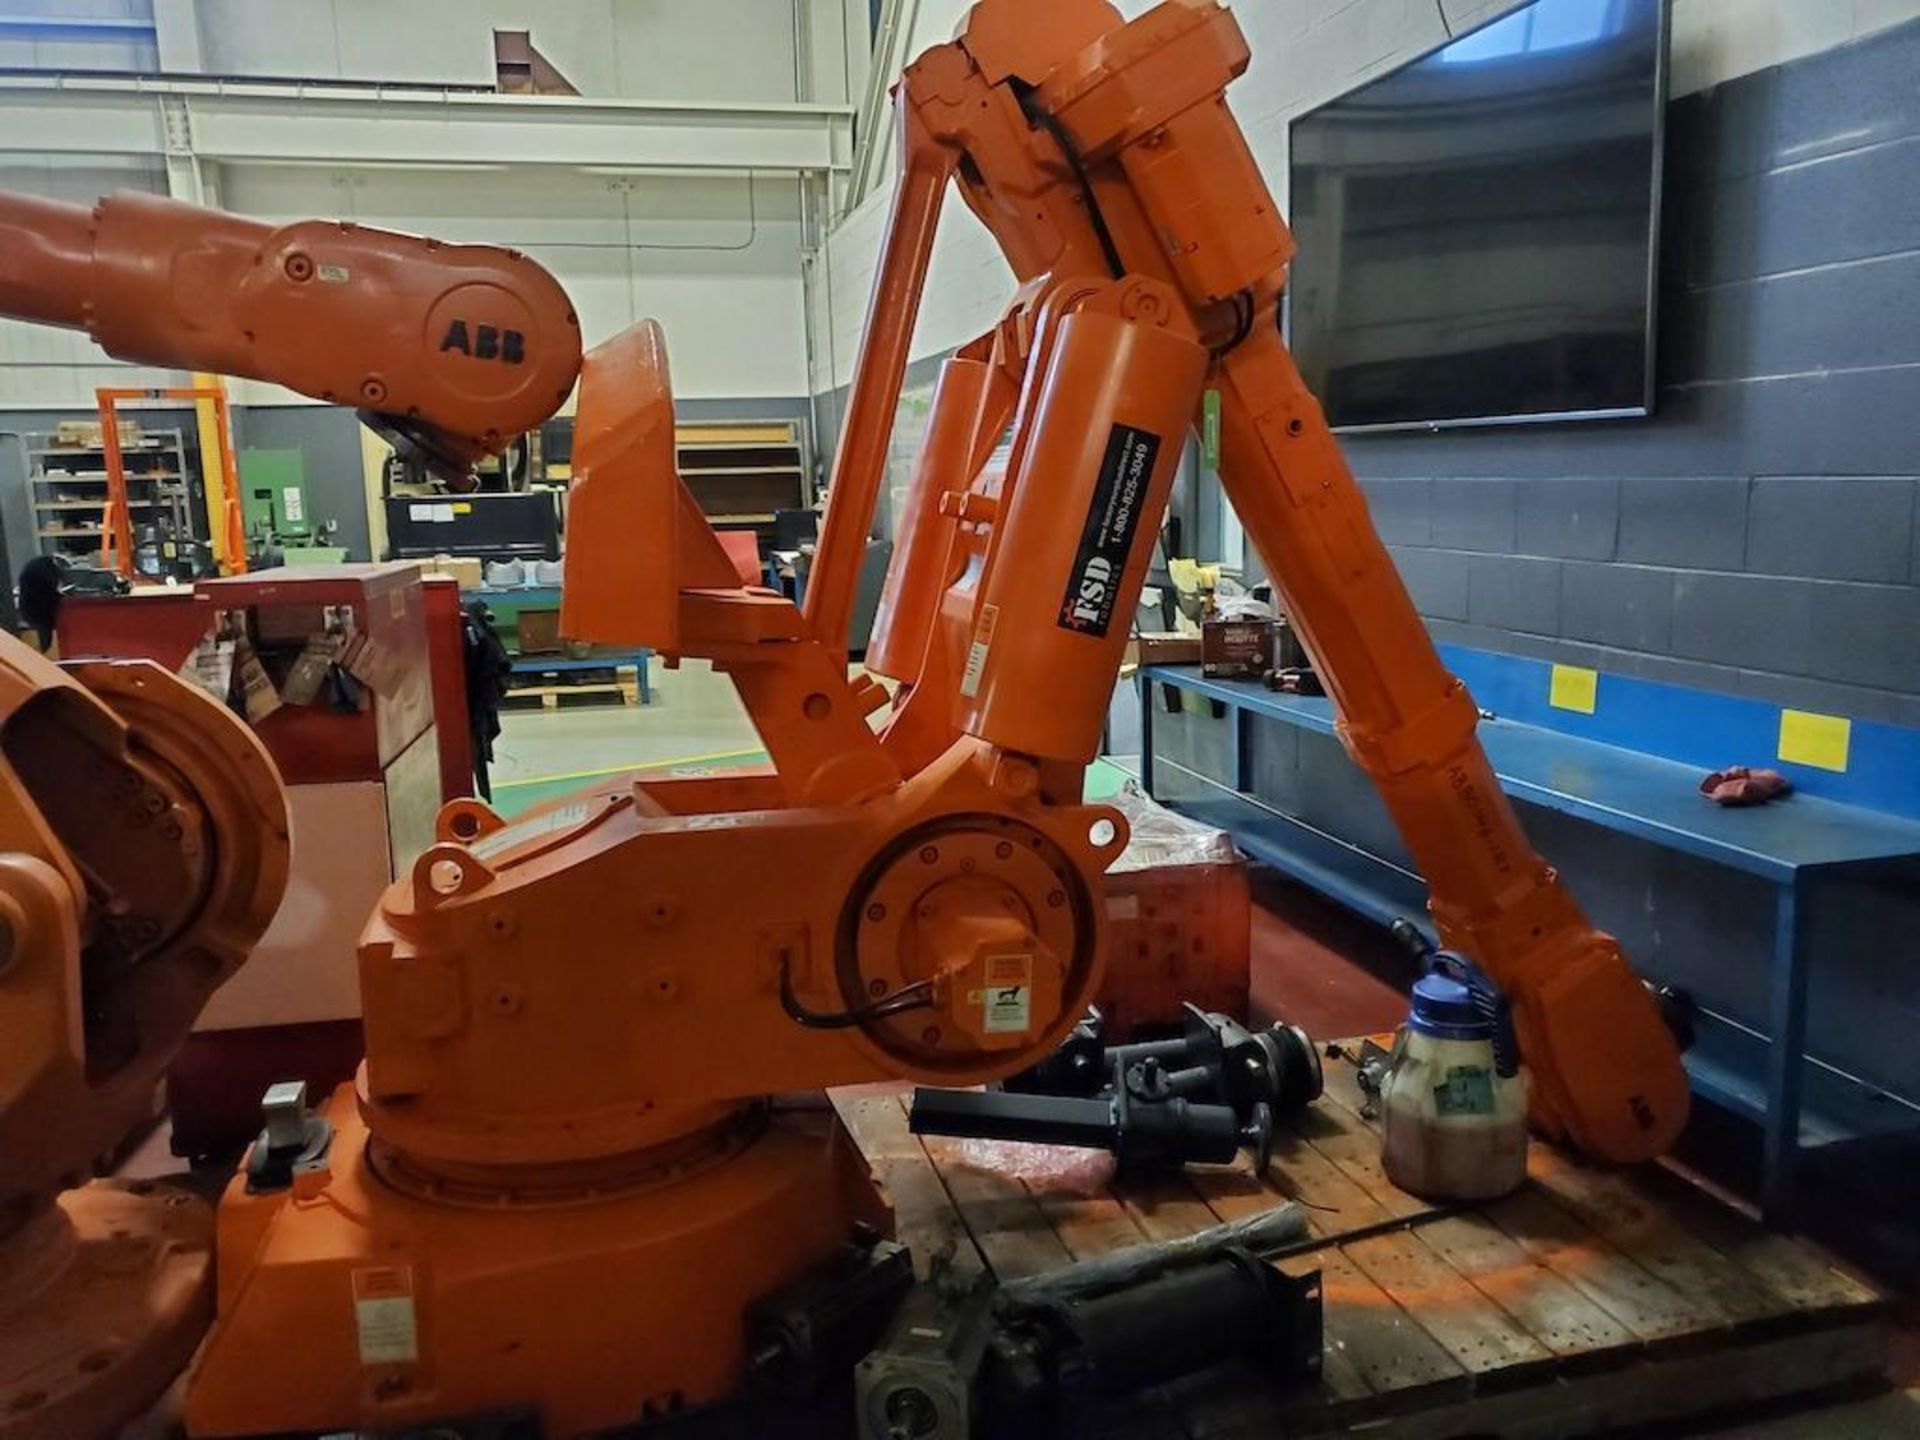 ABB ROBOT BODY MODEL IRB 6400S M2000, SN 64S 20166, ABB0146-IRF, NOTE NO CONTROLS [TOOL ROOM SOUTH